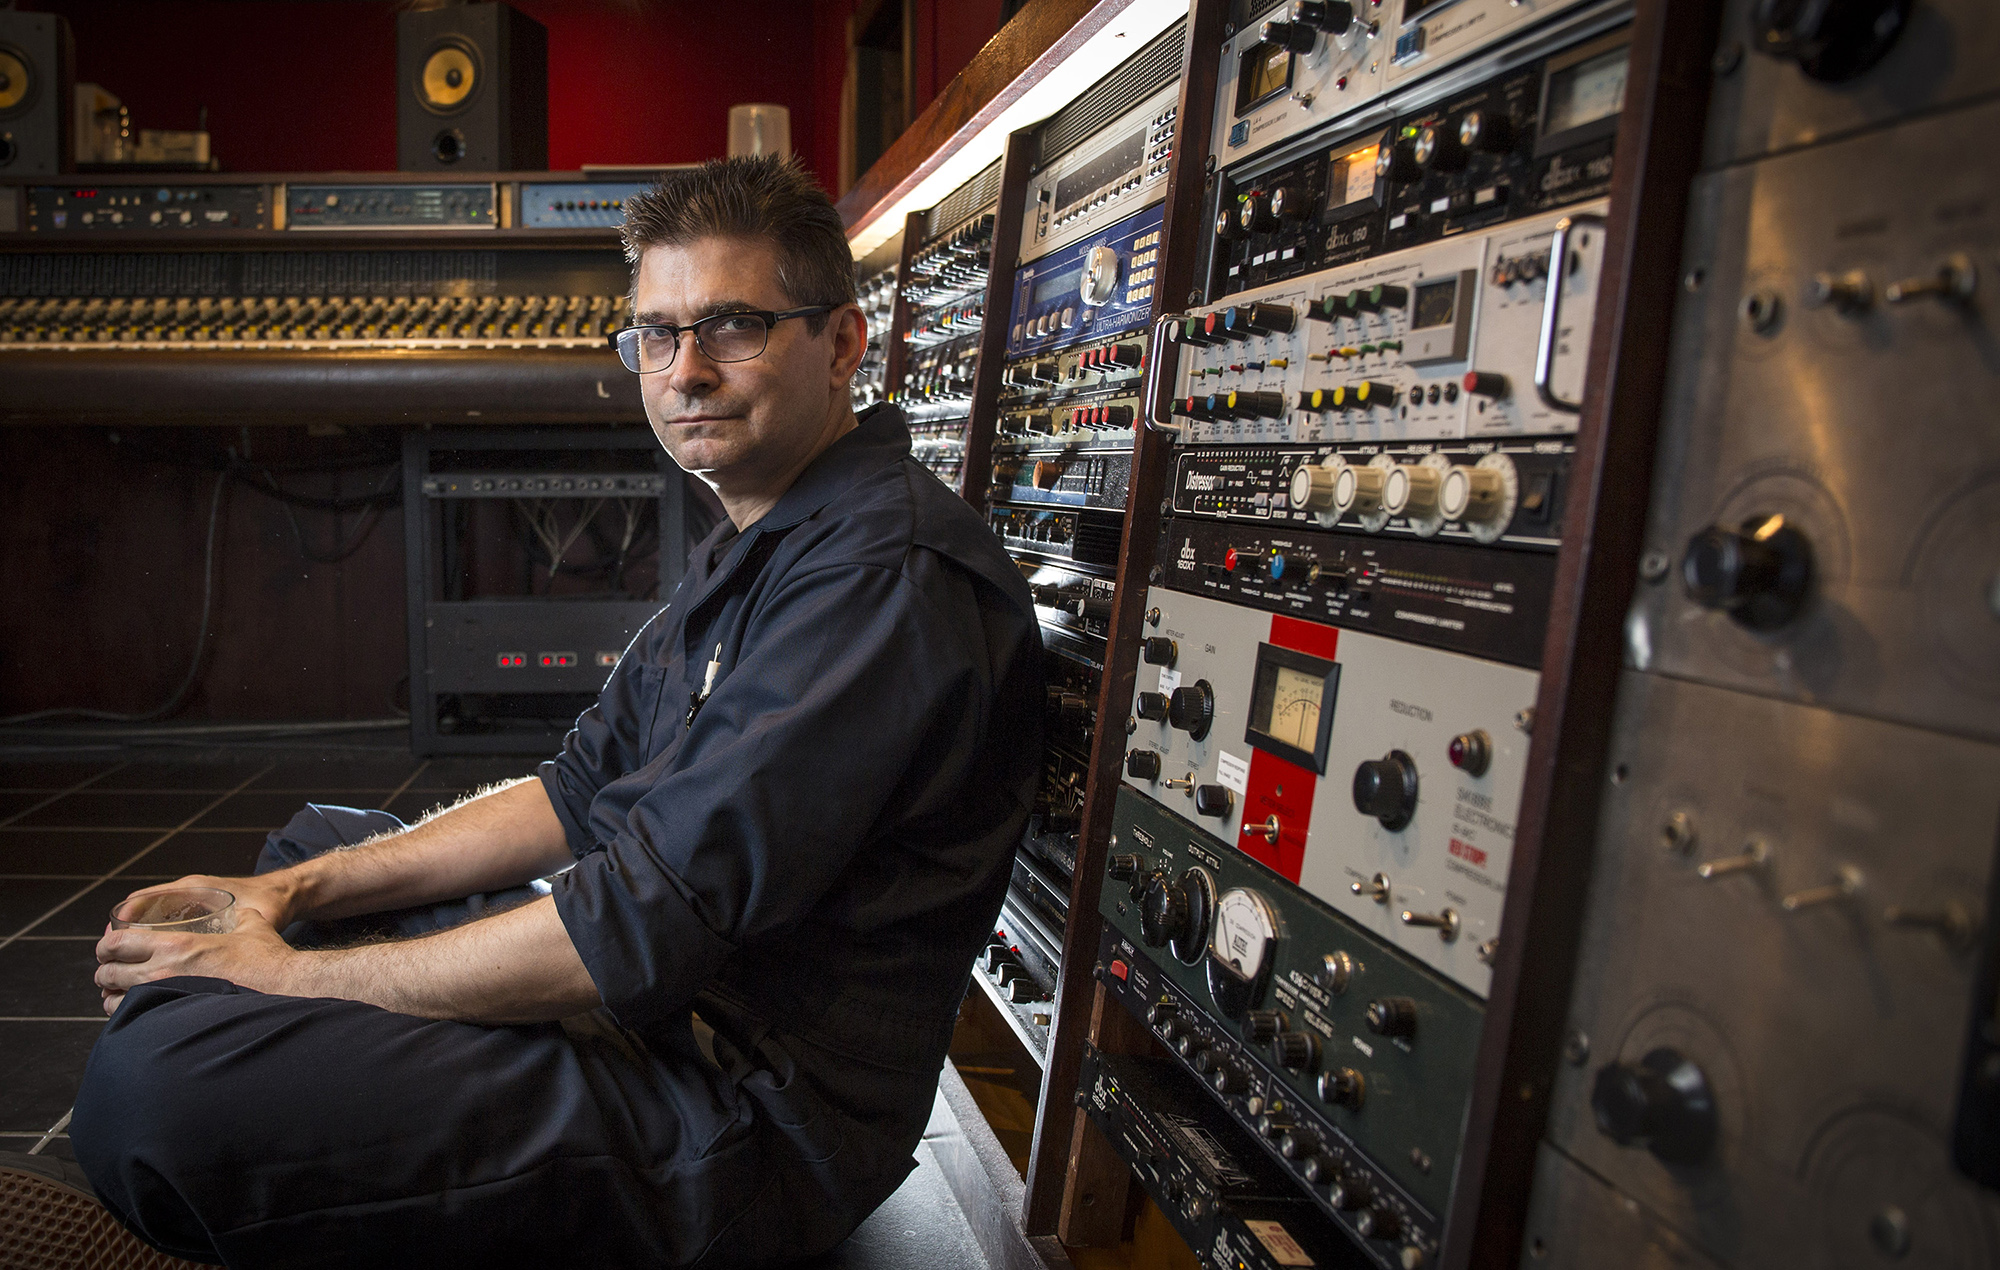 Steve Albini’s guide to recording: “Nothing is ever cast in stone”